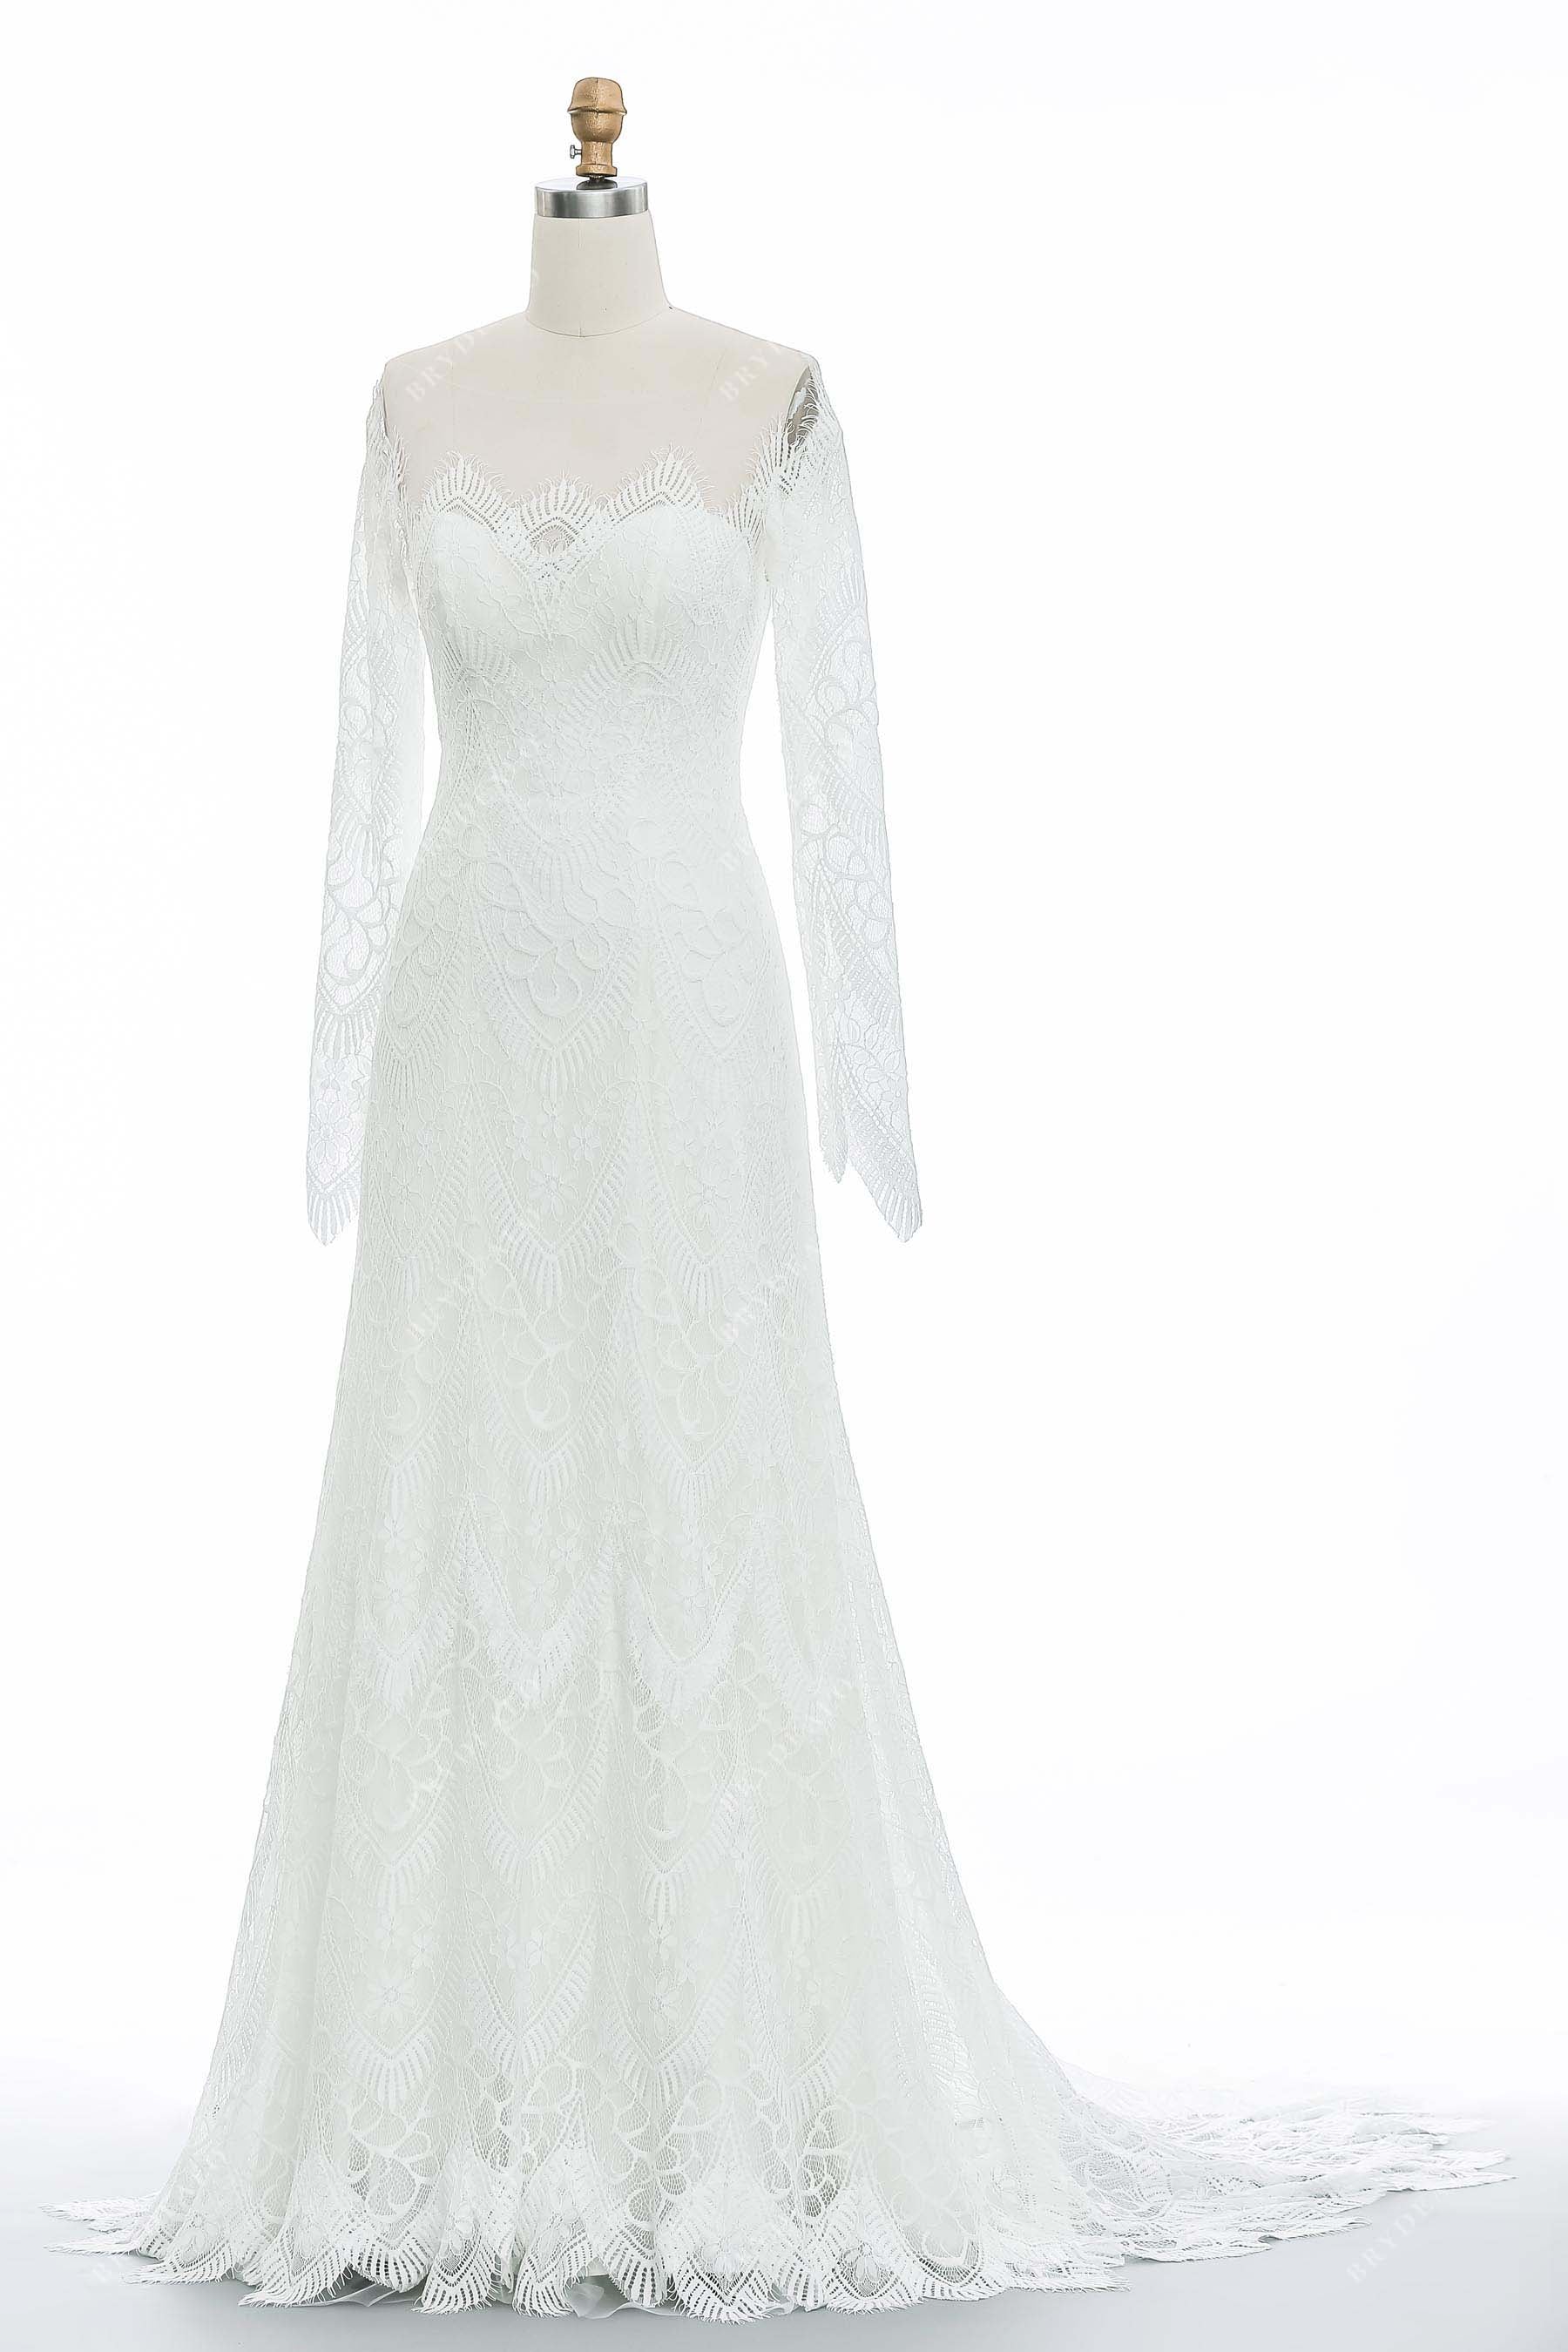 Beautiful Long Sleeve Illusion Neck Scallop Lace Fit-and-Flare Bridal Gown